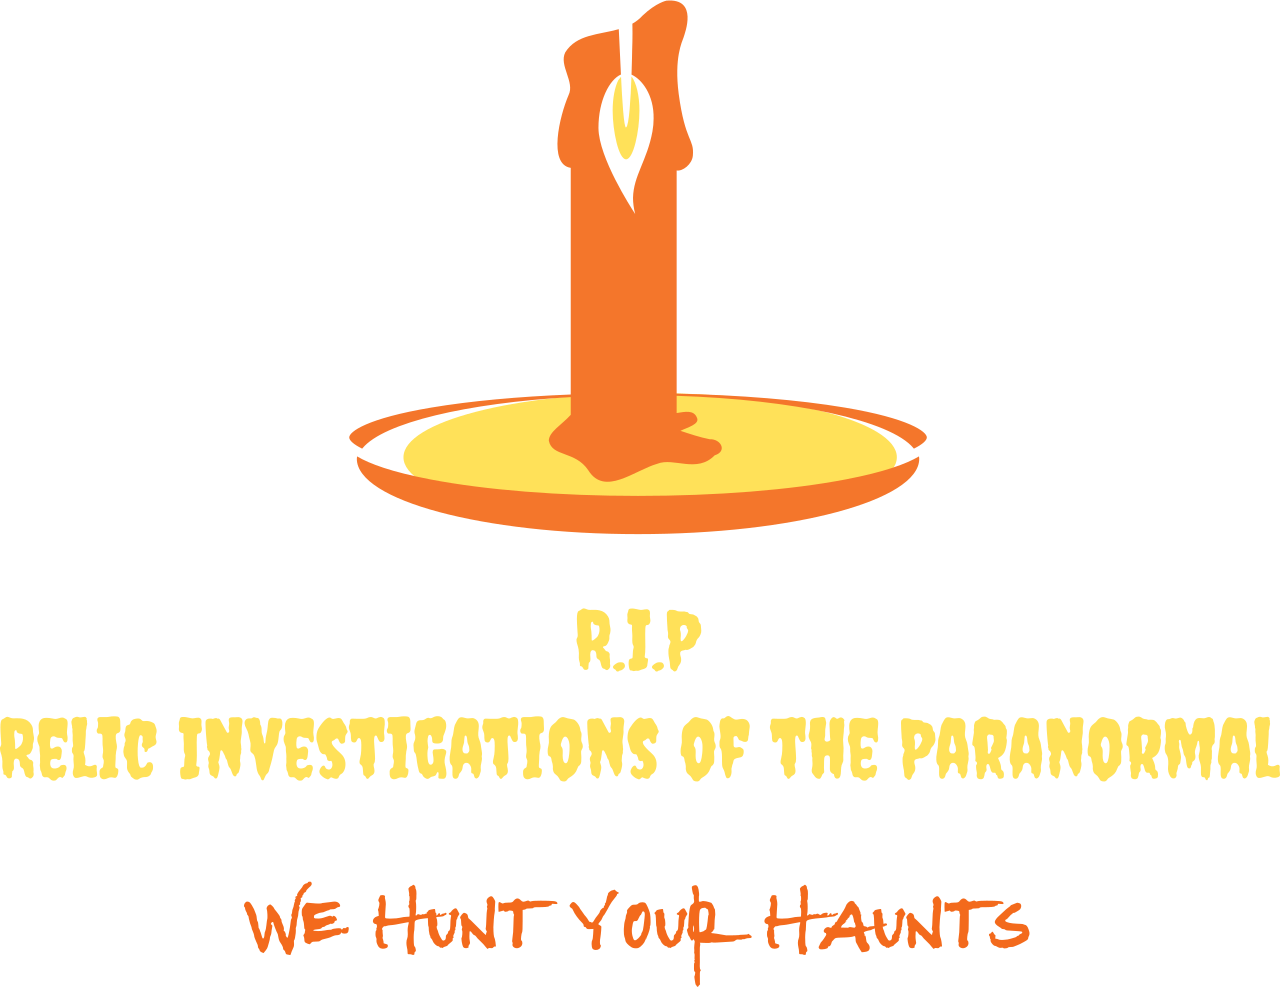 R.I.P
Relic Investigations of the Paranormal's web page